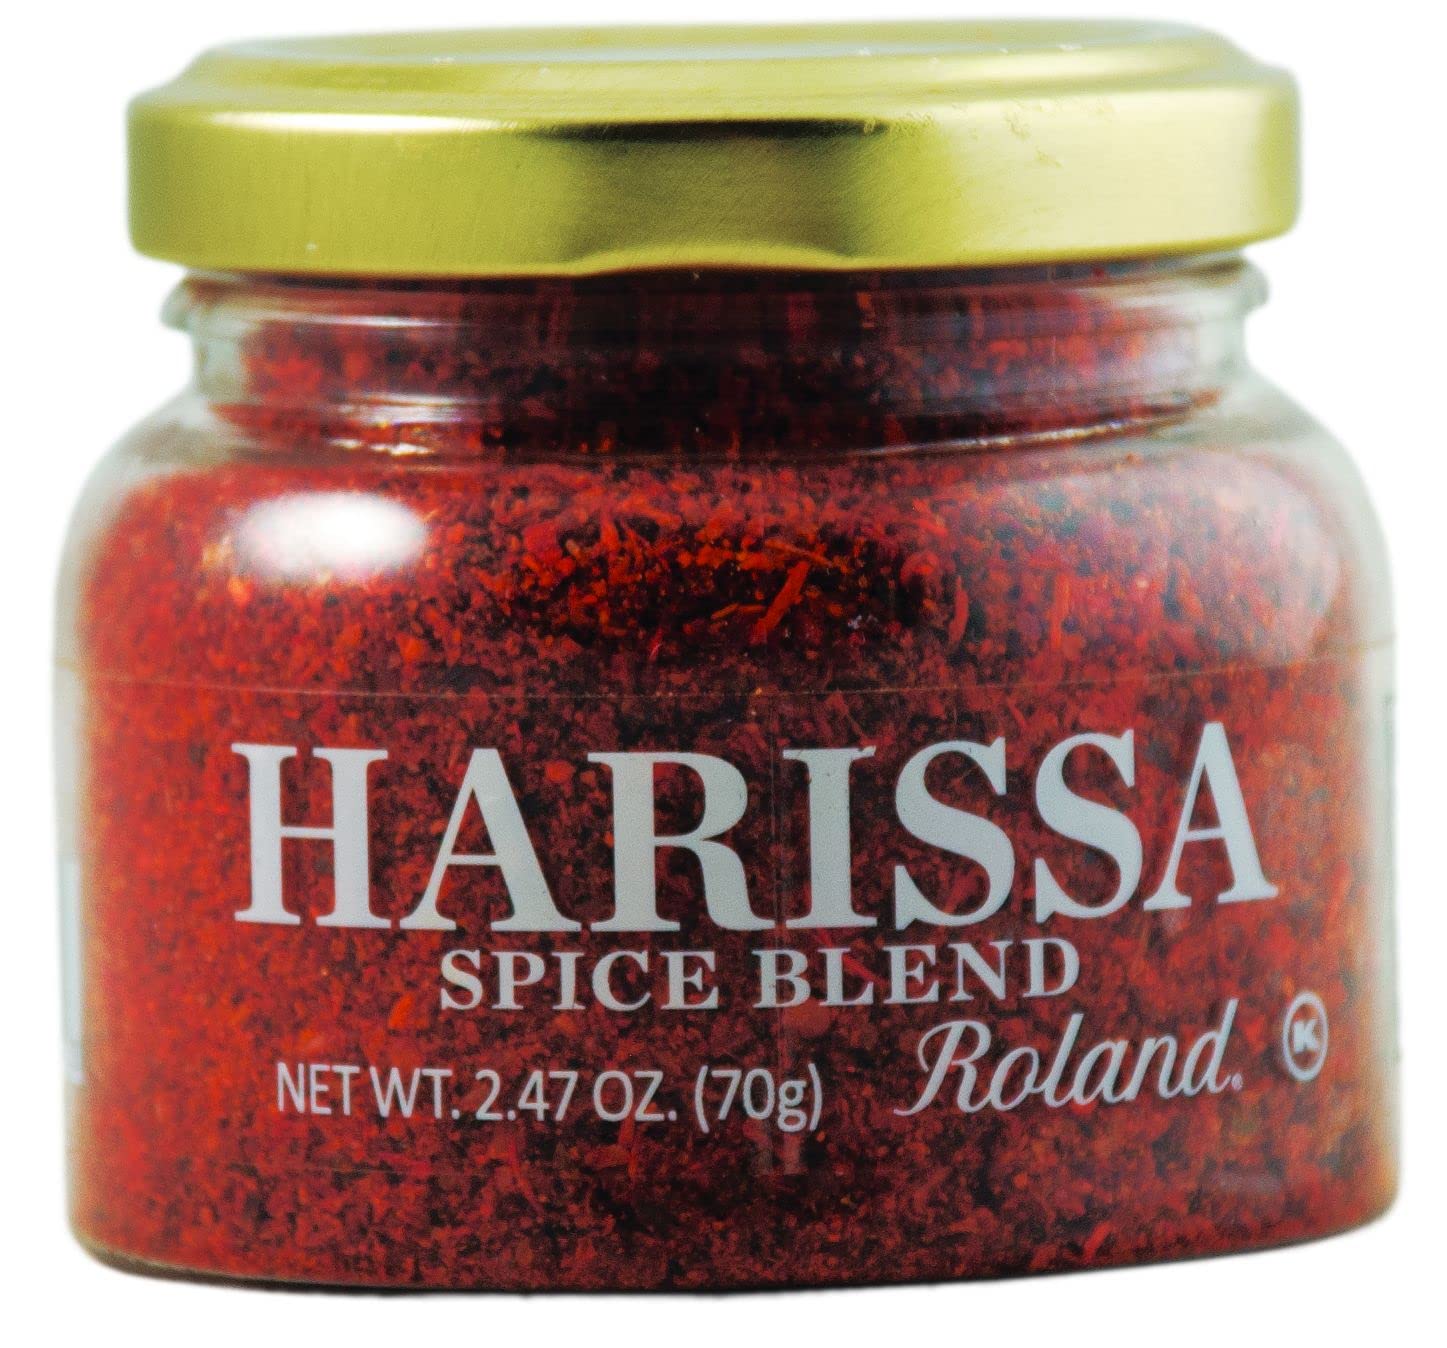 Roland Foods Harissa Spice Blend, Specialty Imported Food, 2.47-Ounce Jar : Grocery & Gourmet Food